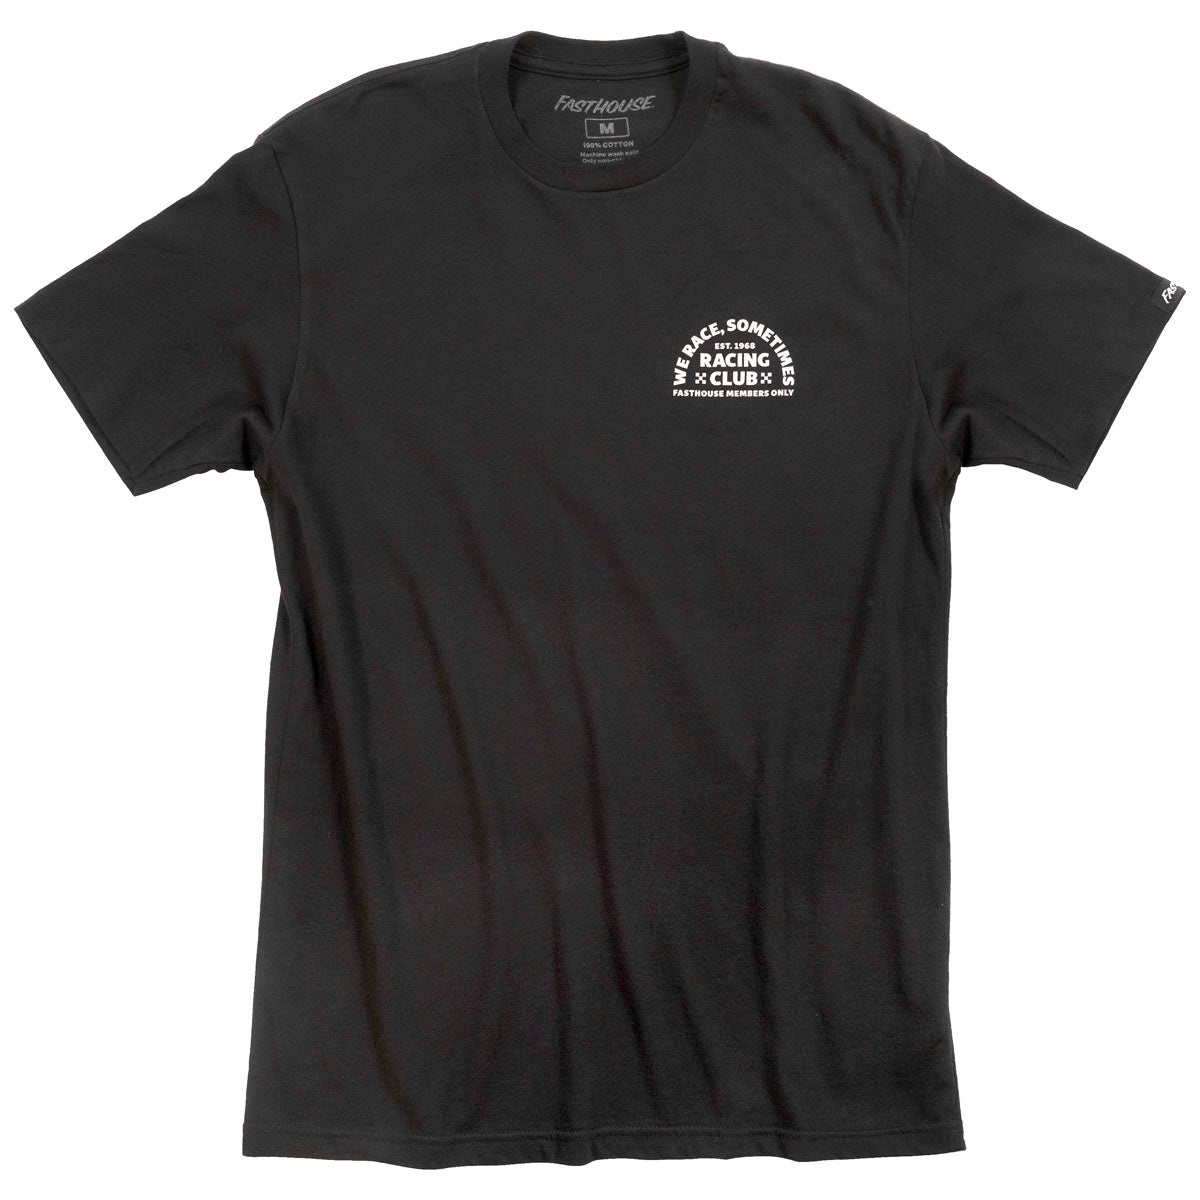 Fasthouse Members Only Tee - Black